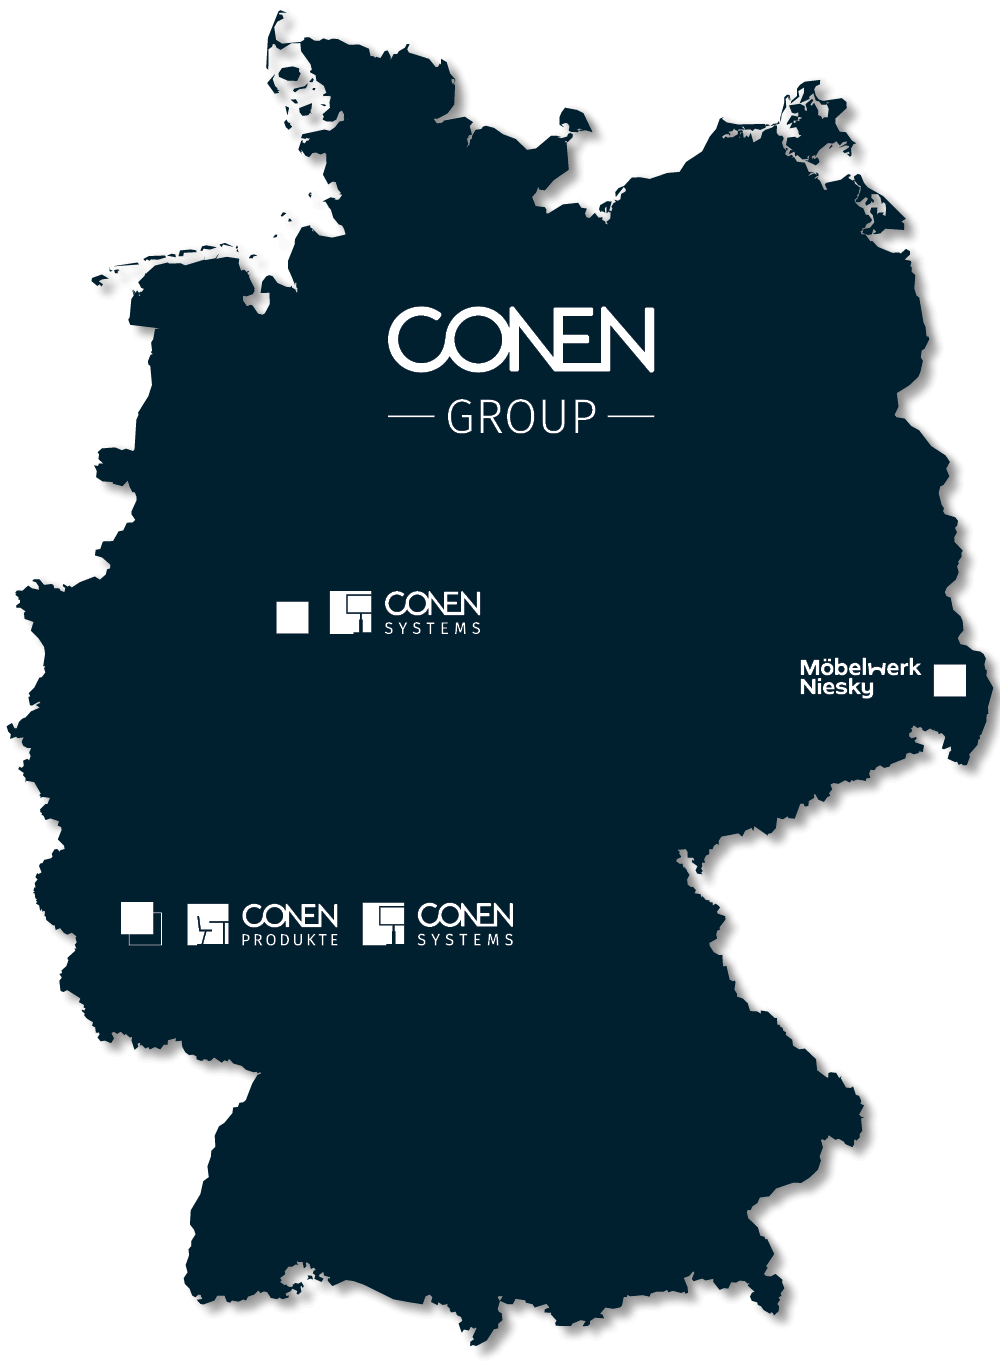 Conen Group locations on the map of Germany